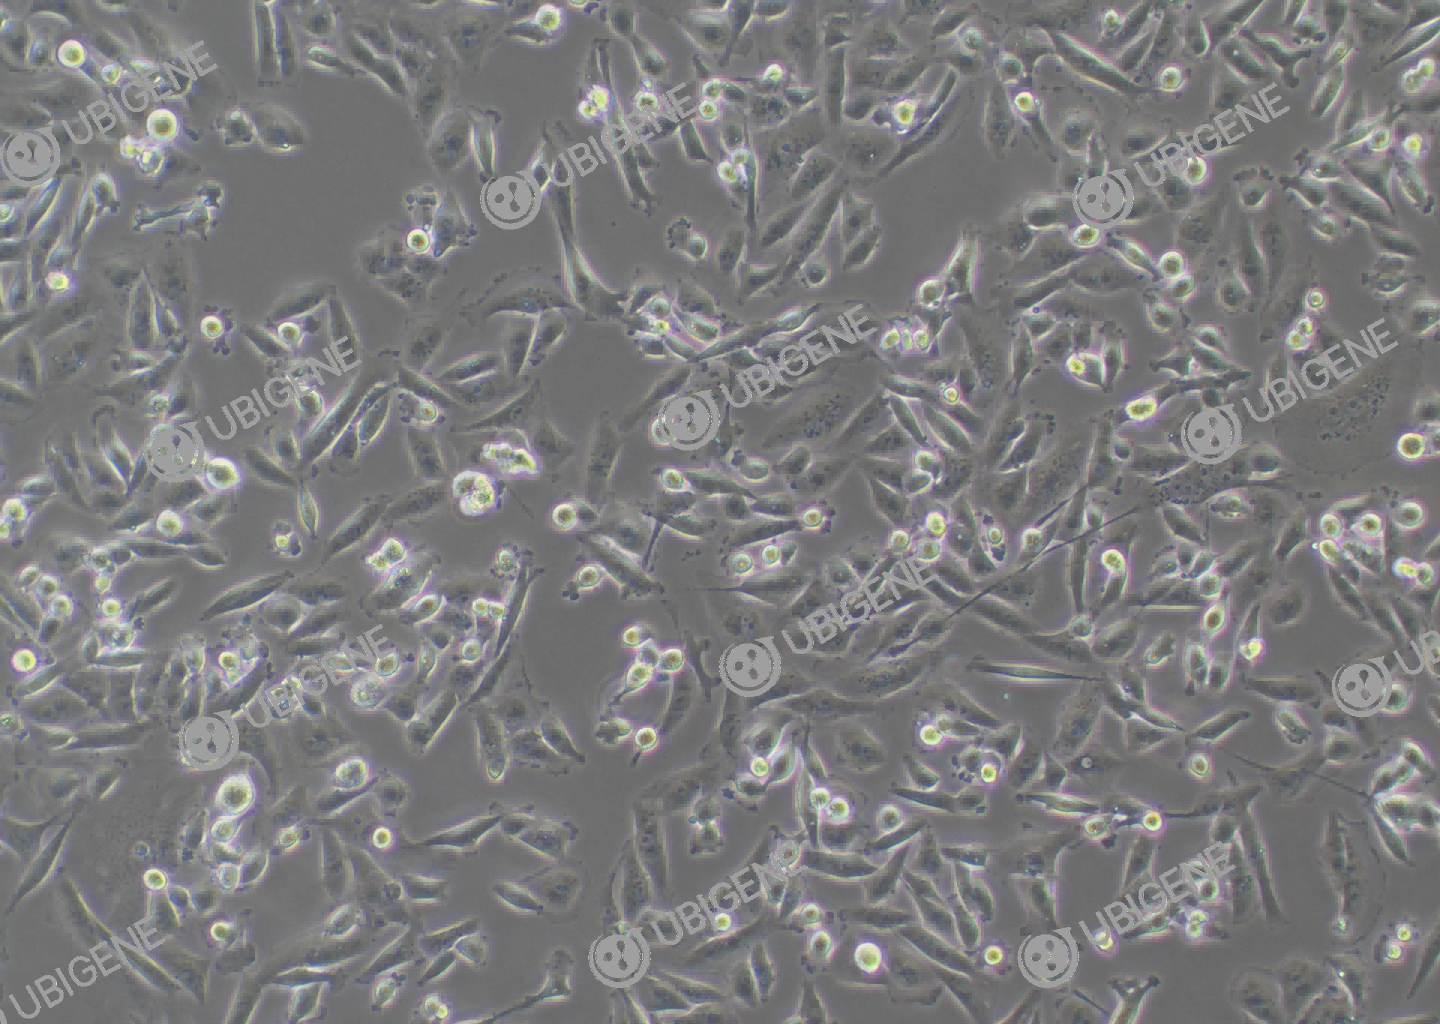 MDA-MB-231 cell line Cultured cell morphology